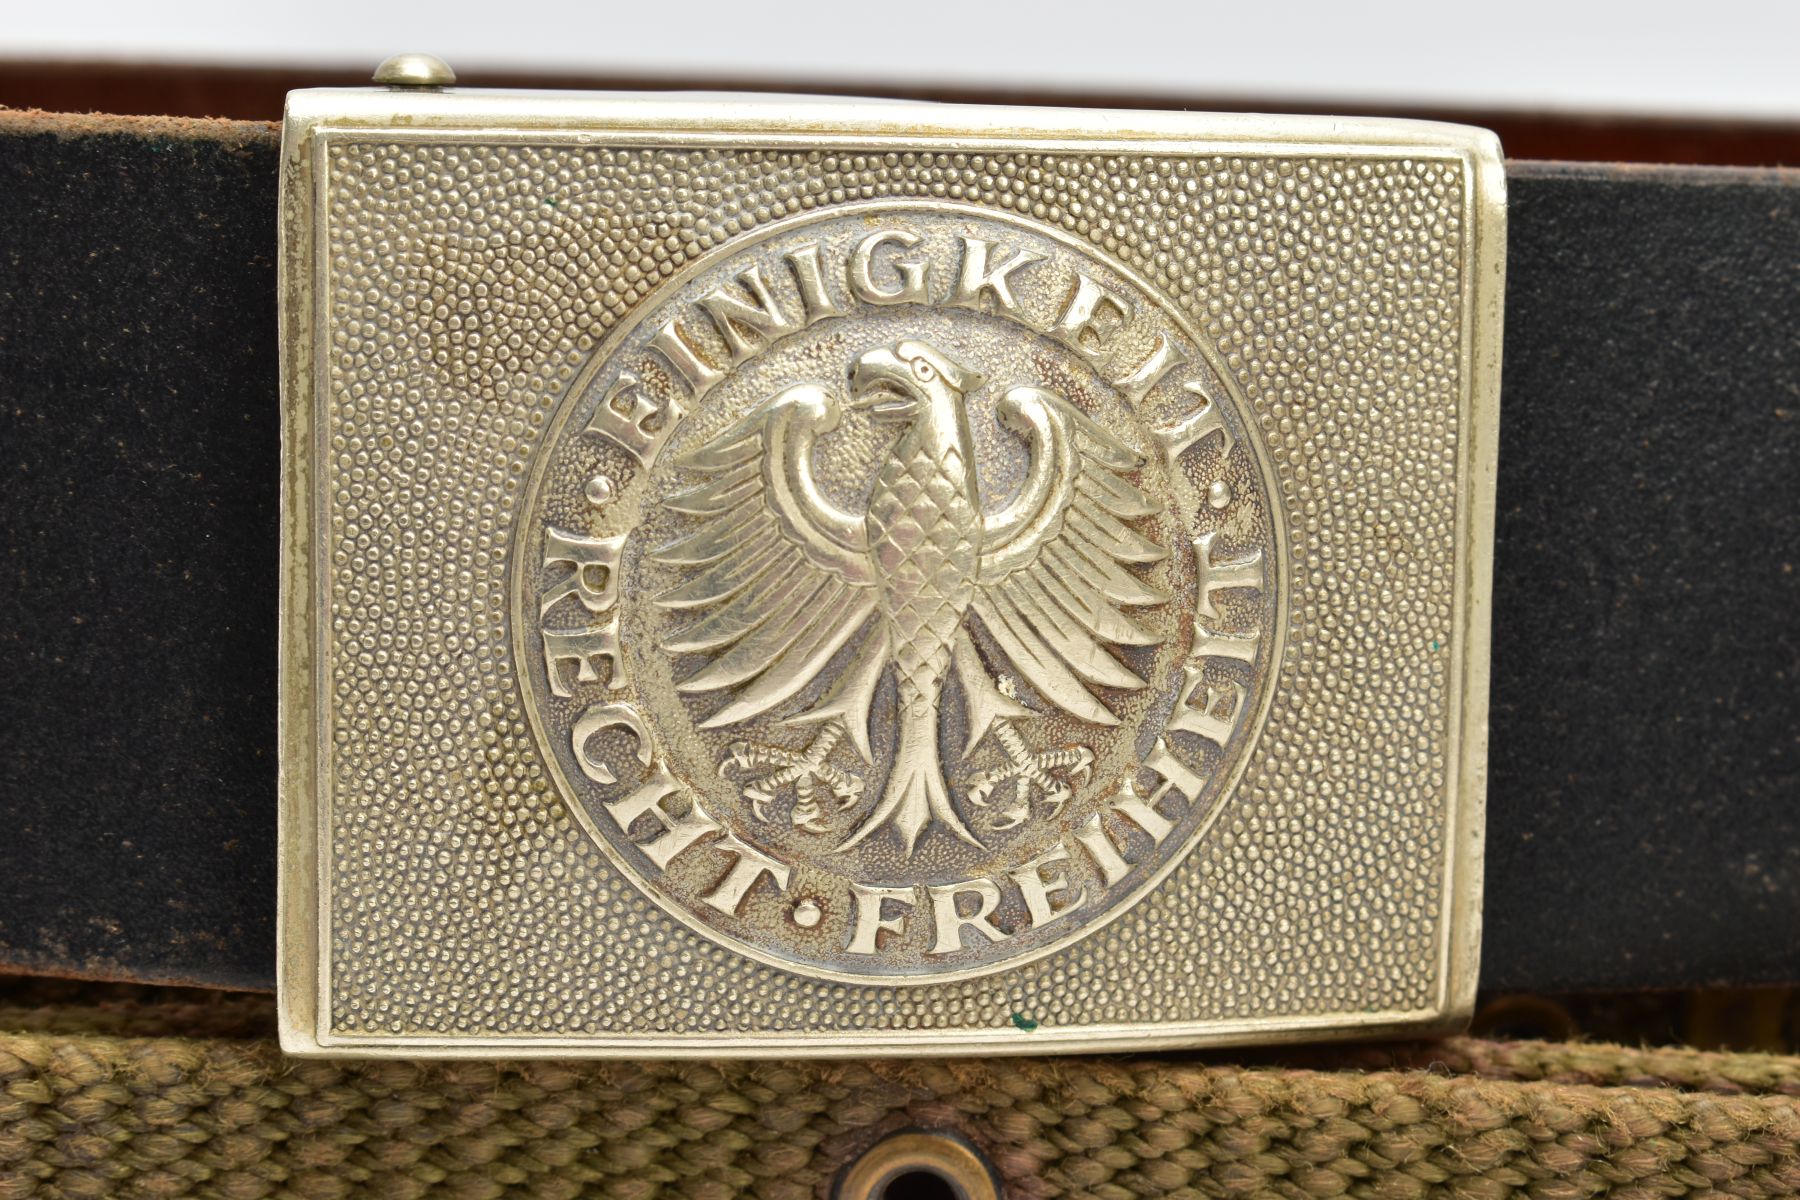 GERMAN POST WWII BUNDESWEHR ARMY BELT BUCKLE, with leather belt, the buckle is one piece face - Image 2 of 8